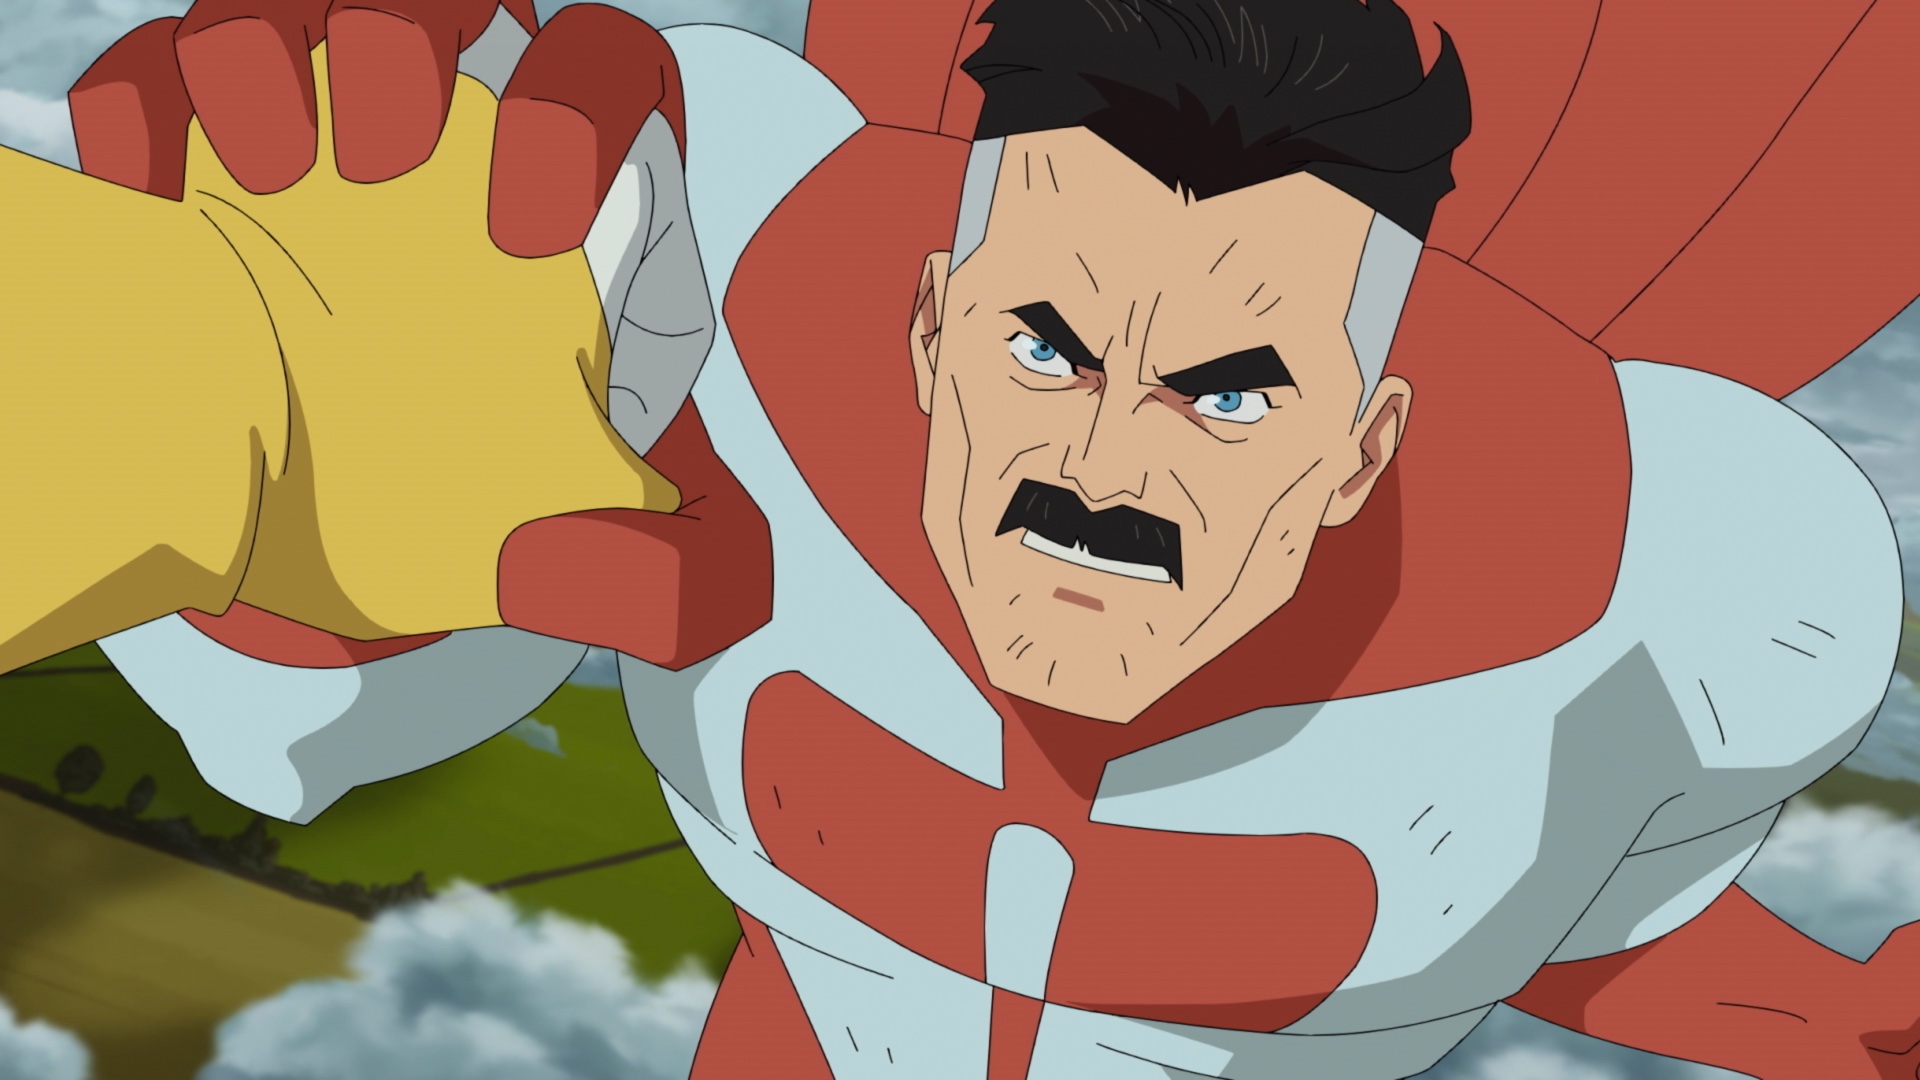 Just finished watching Season 1 of Invincible. Omni-man is my